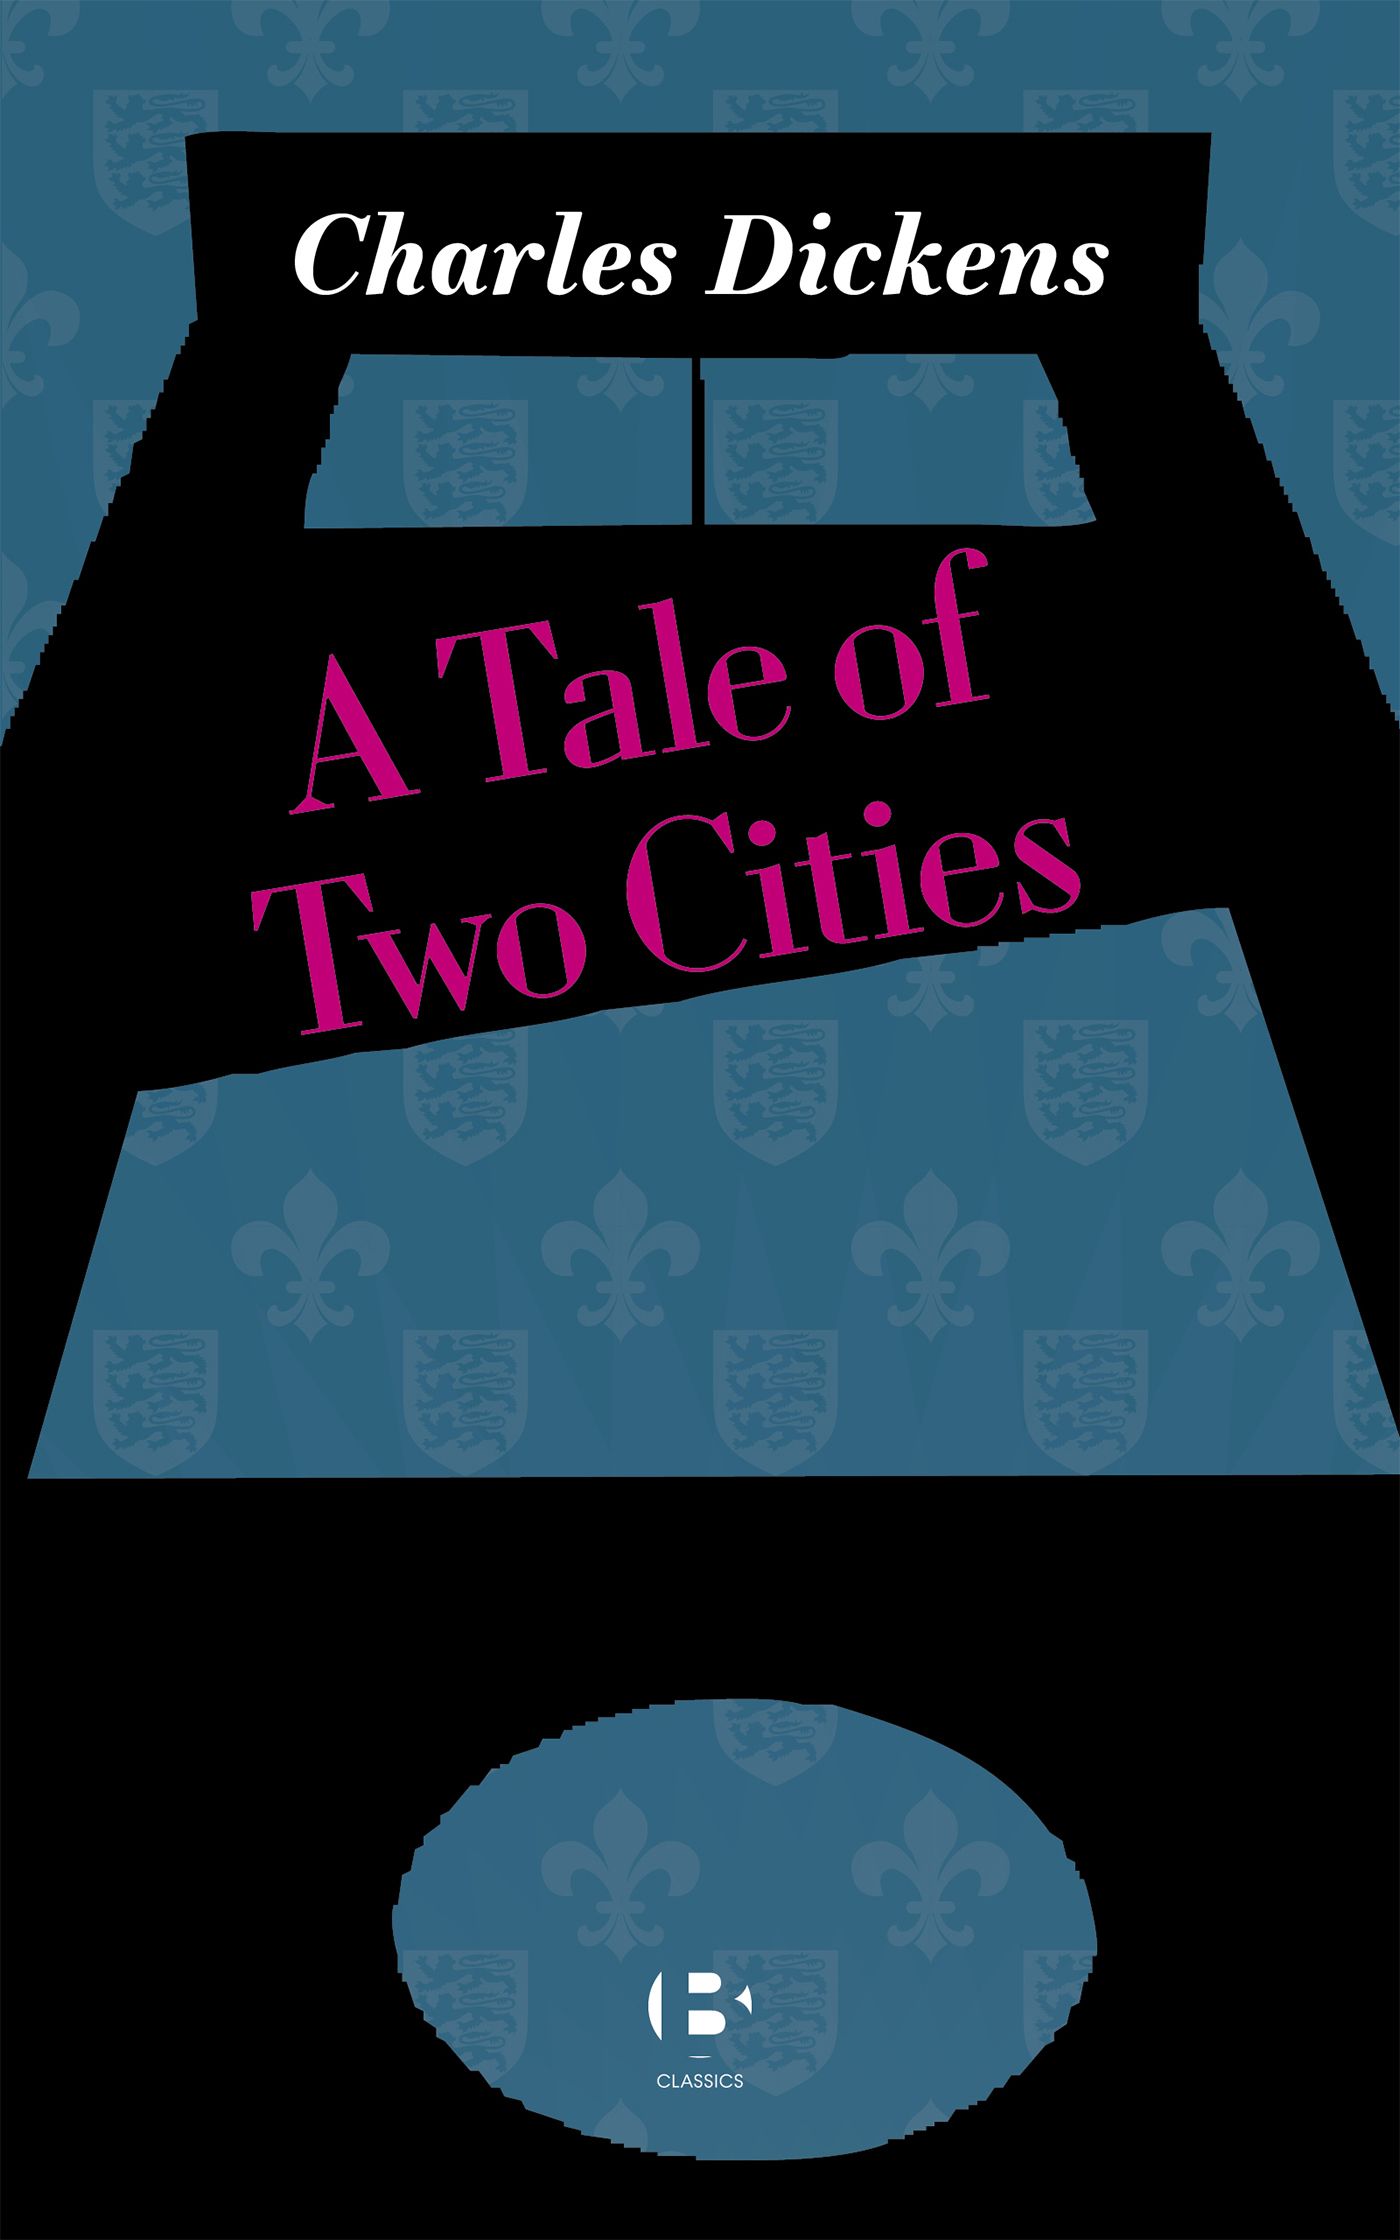 A Tale of Two Cities, e-bog af Charles Dickens